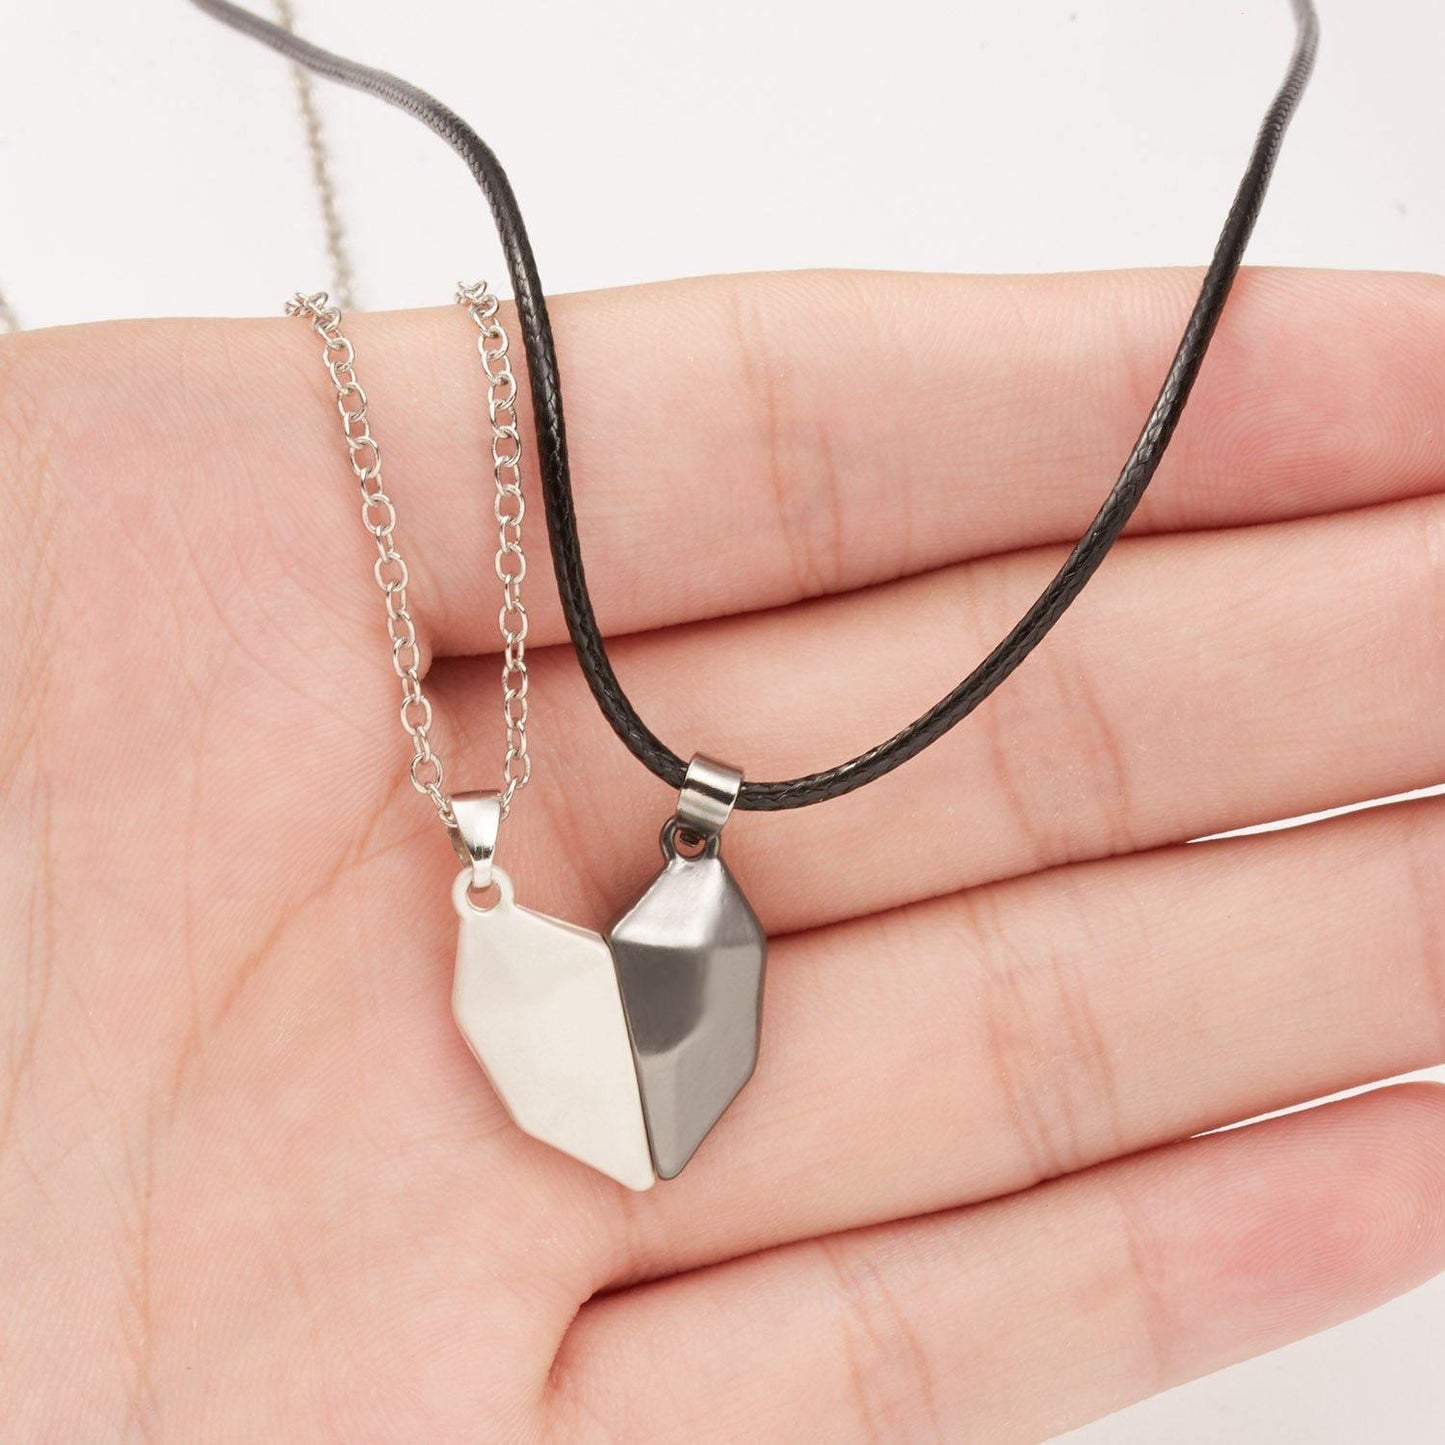 Magnetic Connecting Best Friend Necklace For Bestie for Christmas 2023 | Magnetic Connecting Best Friend Necklace For Bestie - undefined | best friend necklace for 2, best friend necklaces magnetic, Friendship Pendant Necklaces, gift ideas for Best Friends, Magnetic Friendship necklace, Magnetic heart Necklace, To My Best Friend Friendship Gift Necklace Set | From Hunny Life | hunnylife.com